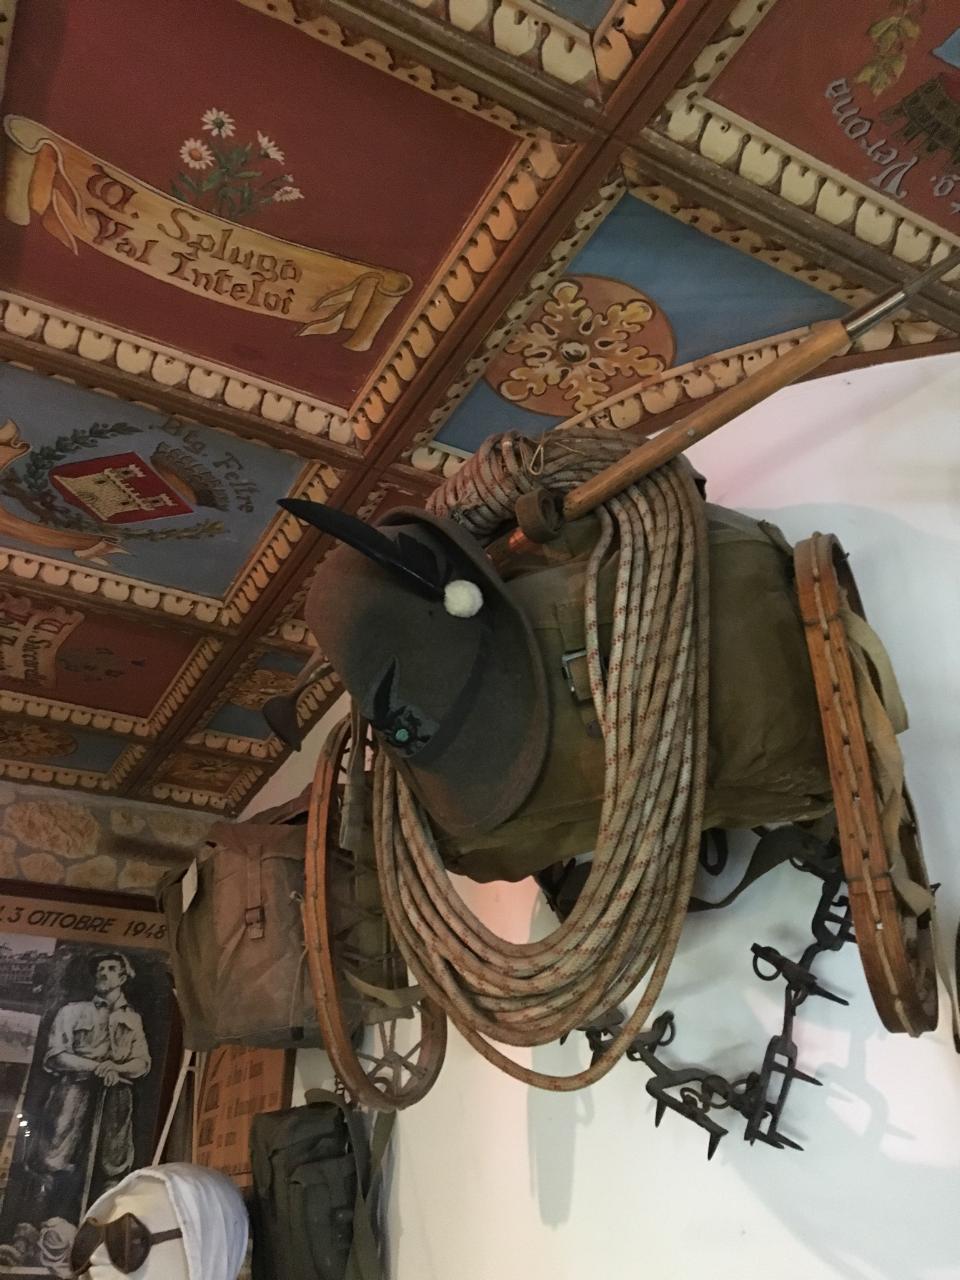 A display of historic alpine climbing gear hanging from a museum wall.